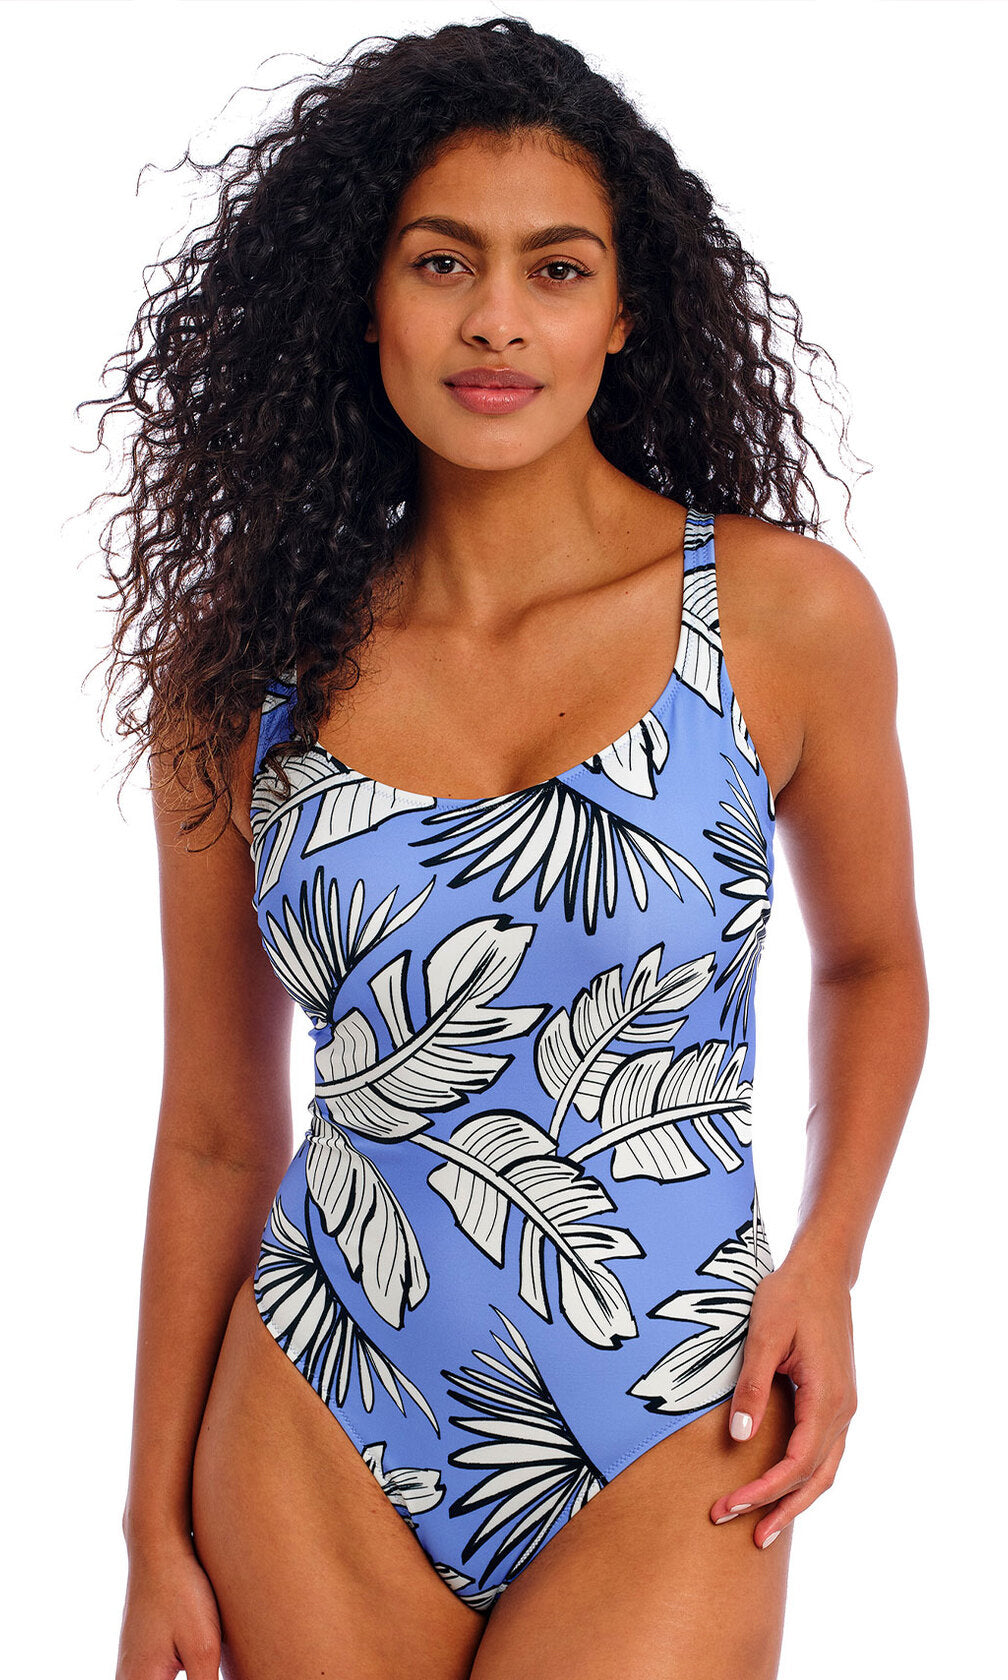 Mali Beach Cornflower UW Swimsuit, Special Order D Cup to GG Cup